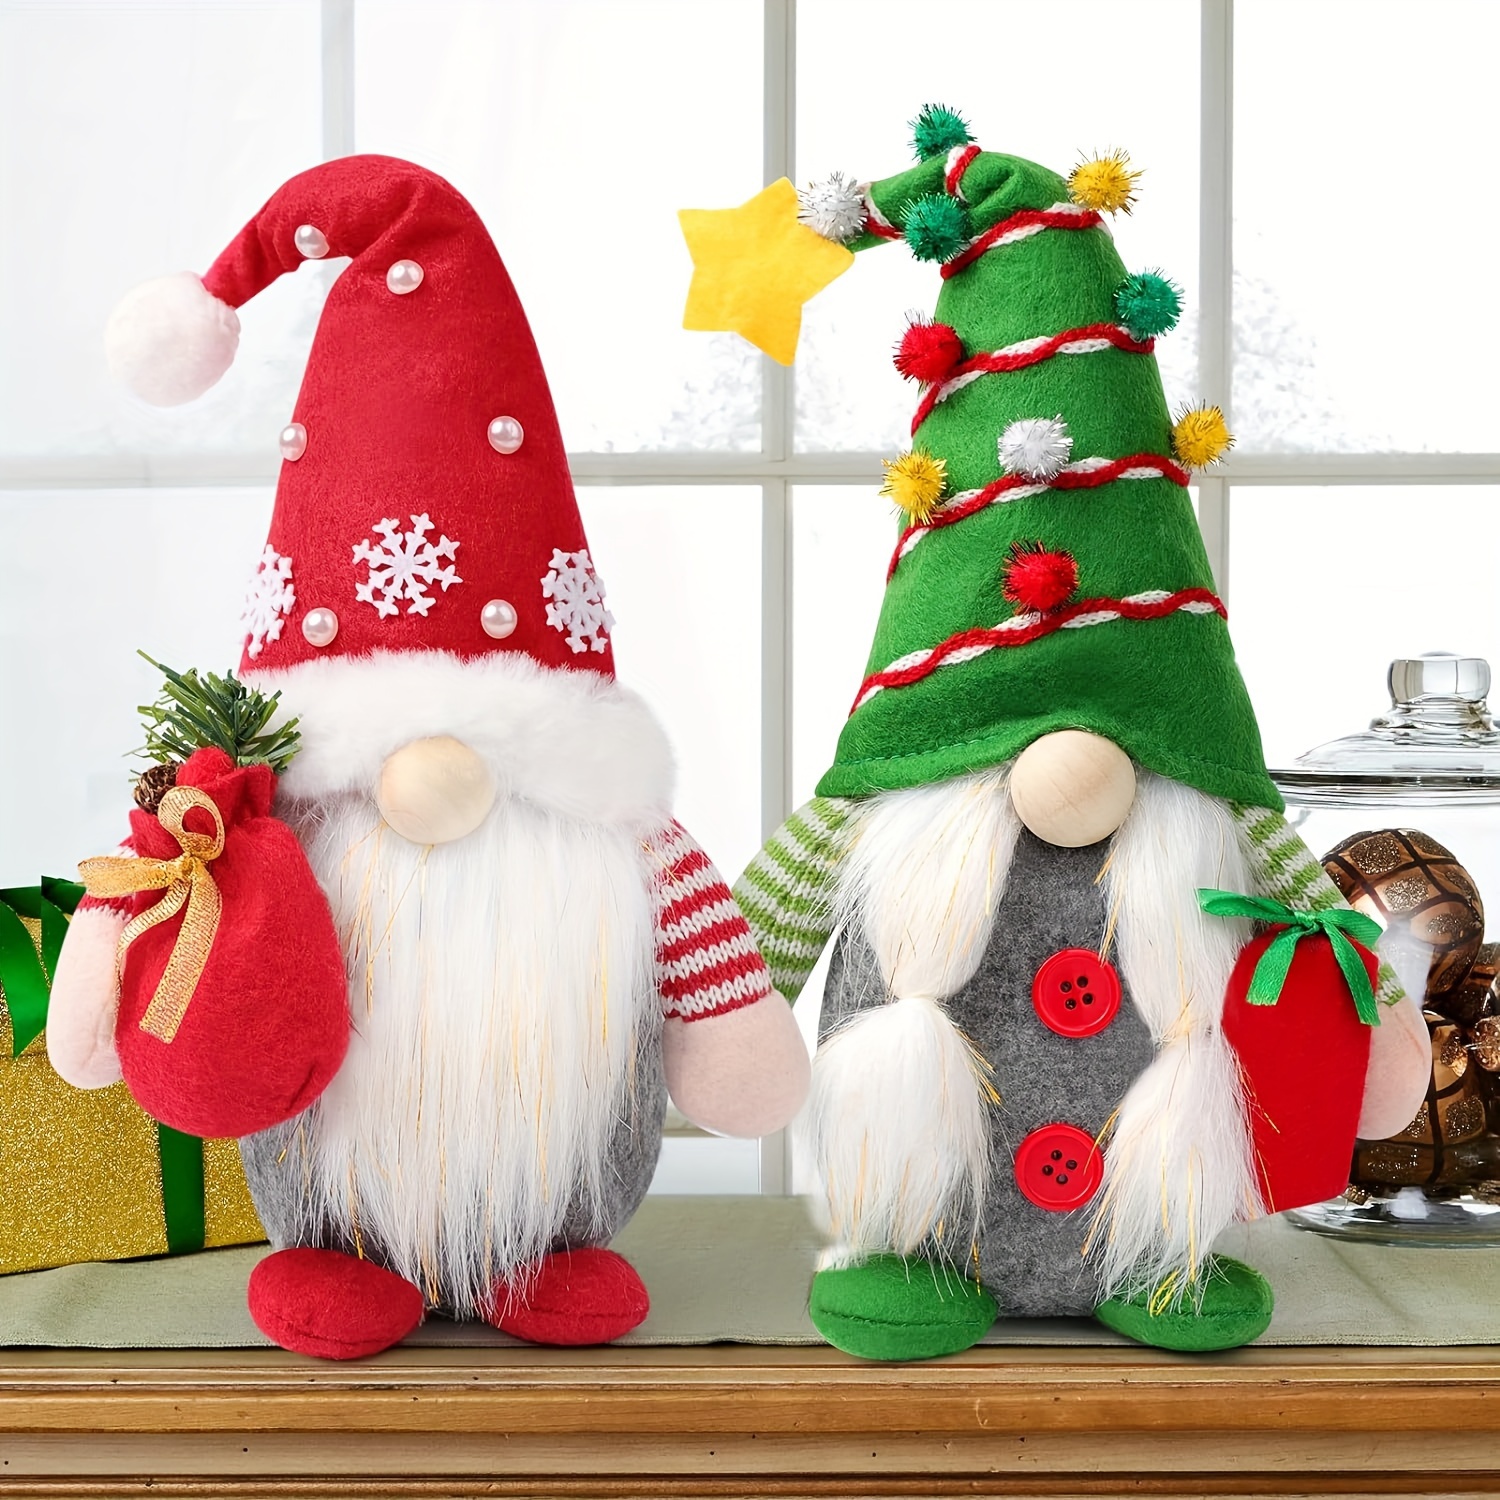 

2pc Classic Christmas Gnome Decorations - Handmade Polyester Elf Ornaments For Holiday Tabletop Display